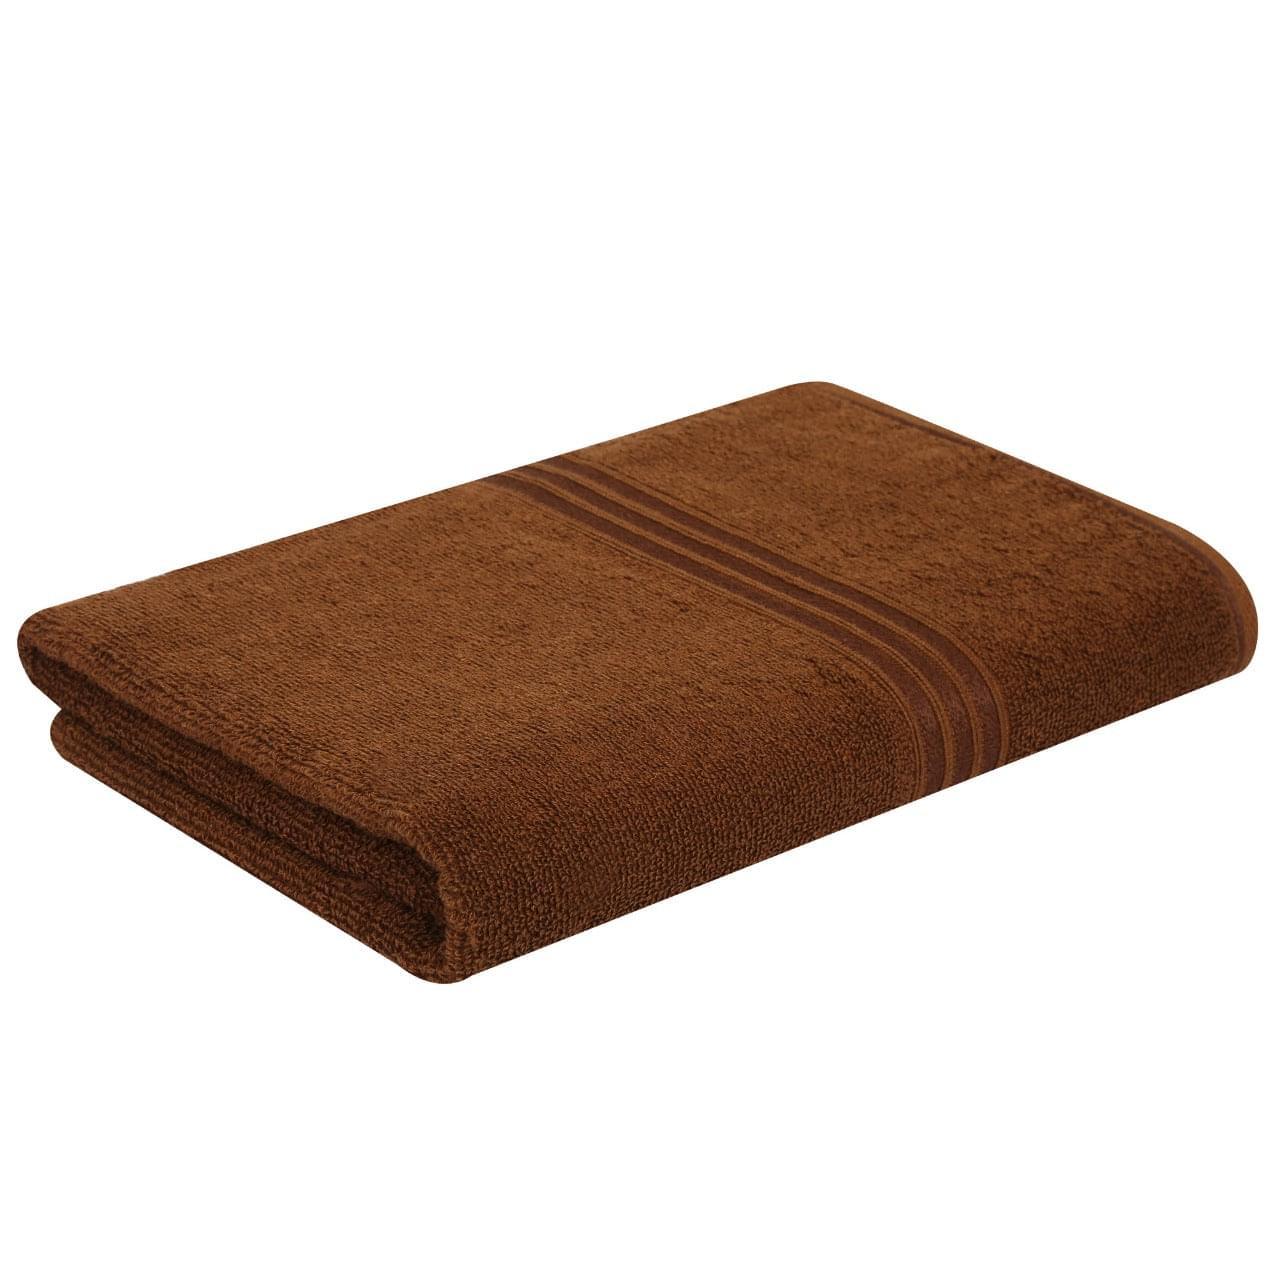 YOUTH ROBE Cotton 599 GSM Bath Towel - YOUTH ROBE